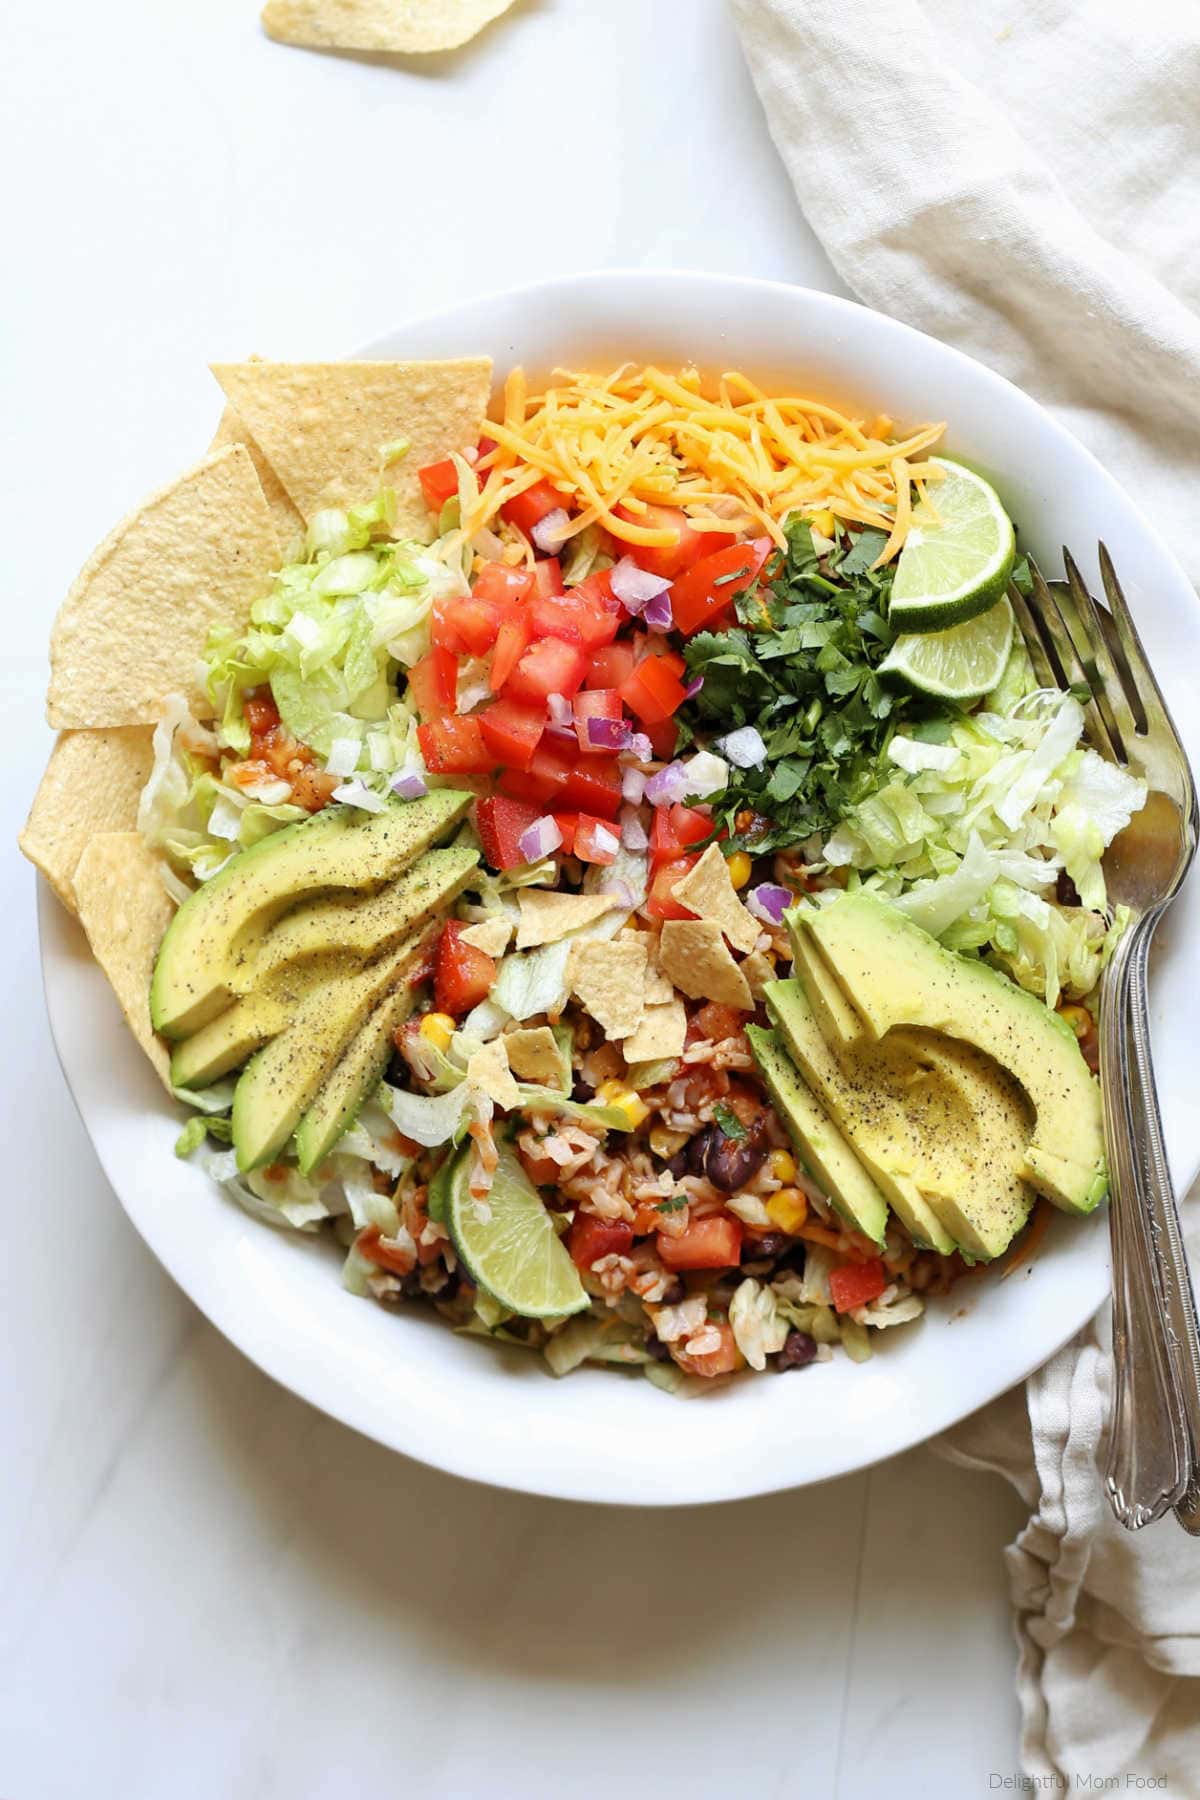 Black bean taco salad in a bowl with avocado slices and tortilla chips.